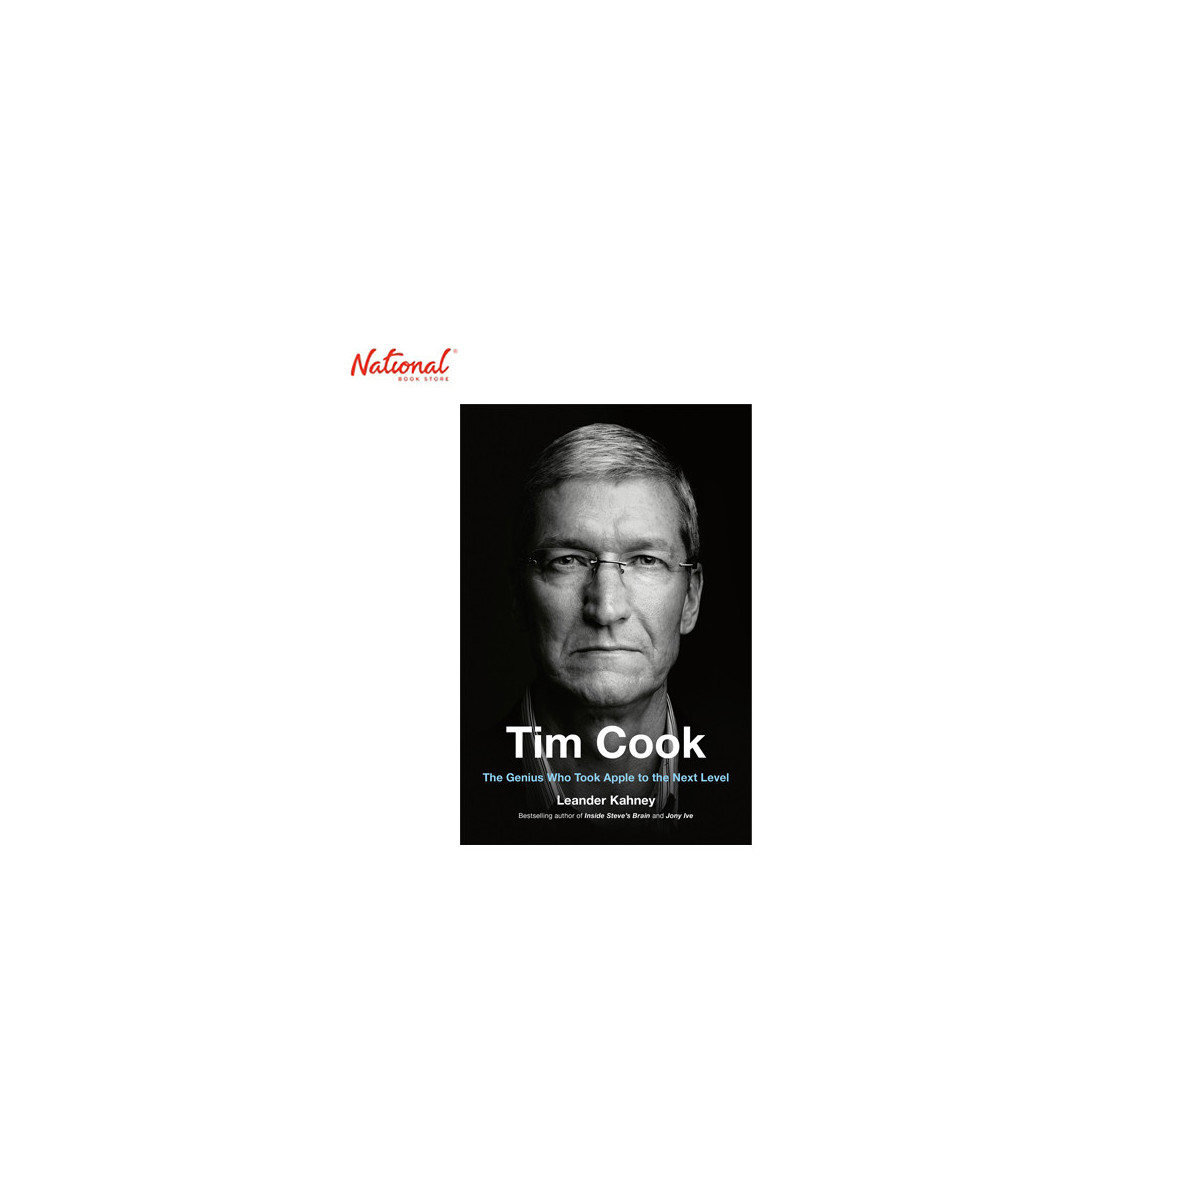 Tim Cook: The Genius Who Took Apple To The Next Level Hardcover by Leander Kahney